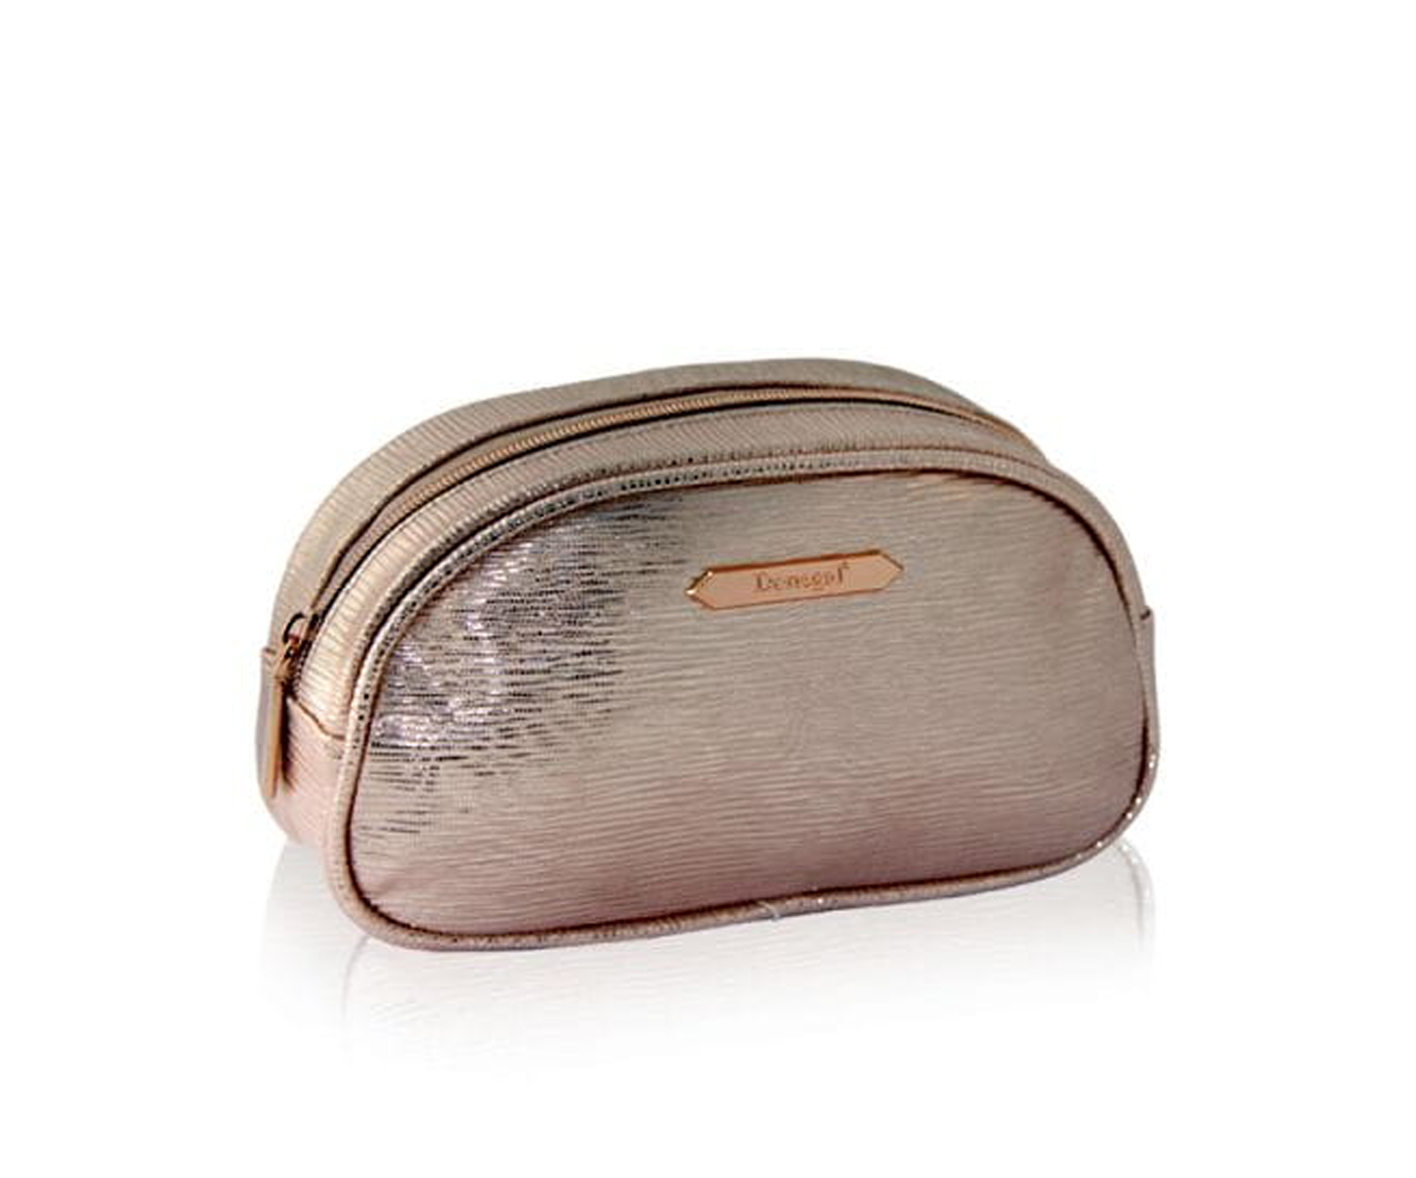 Donegal, Metallic Rose, Small toiletry bag